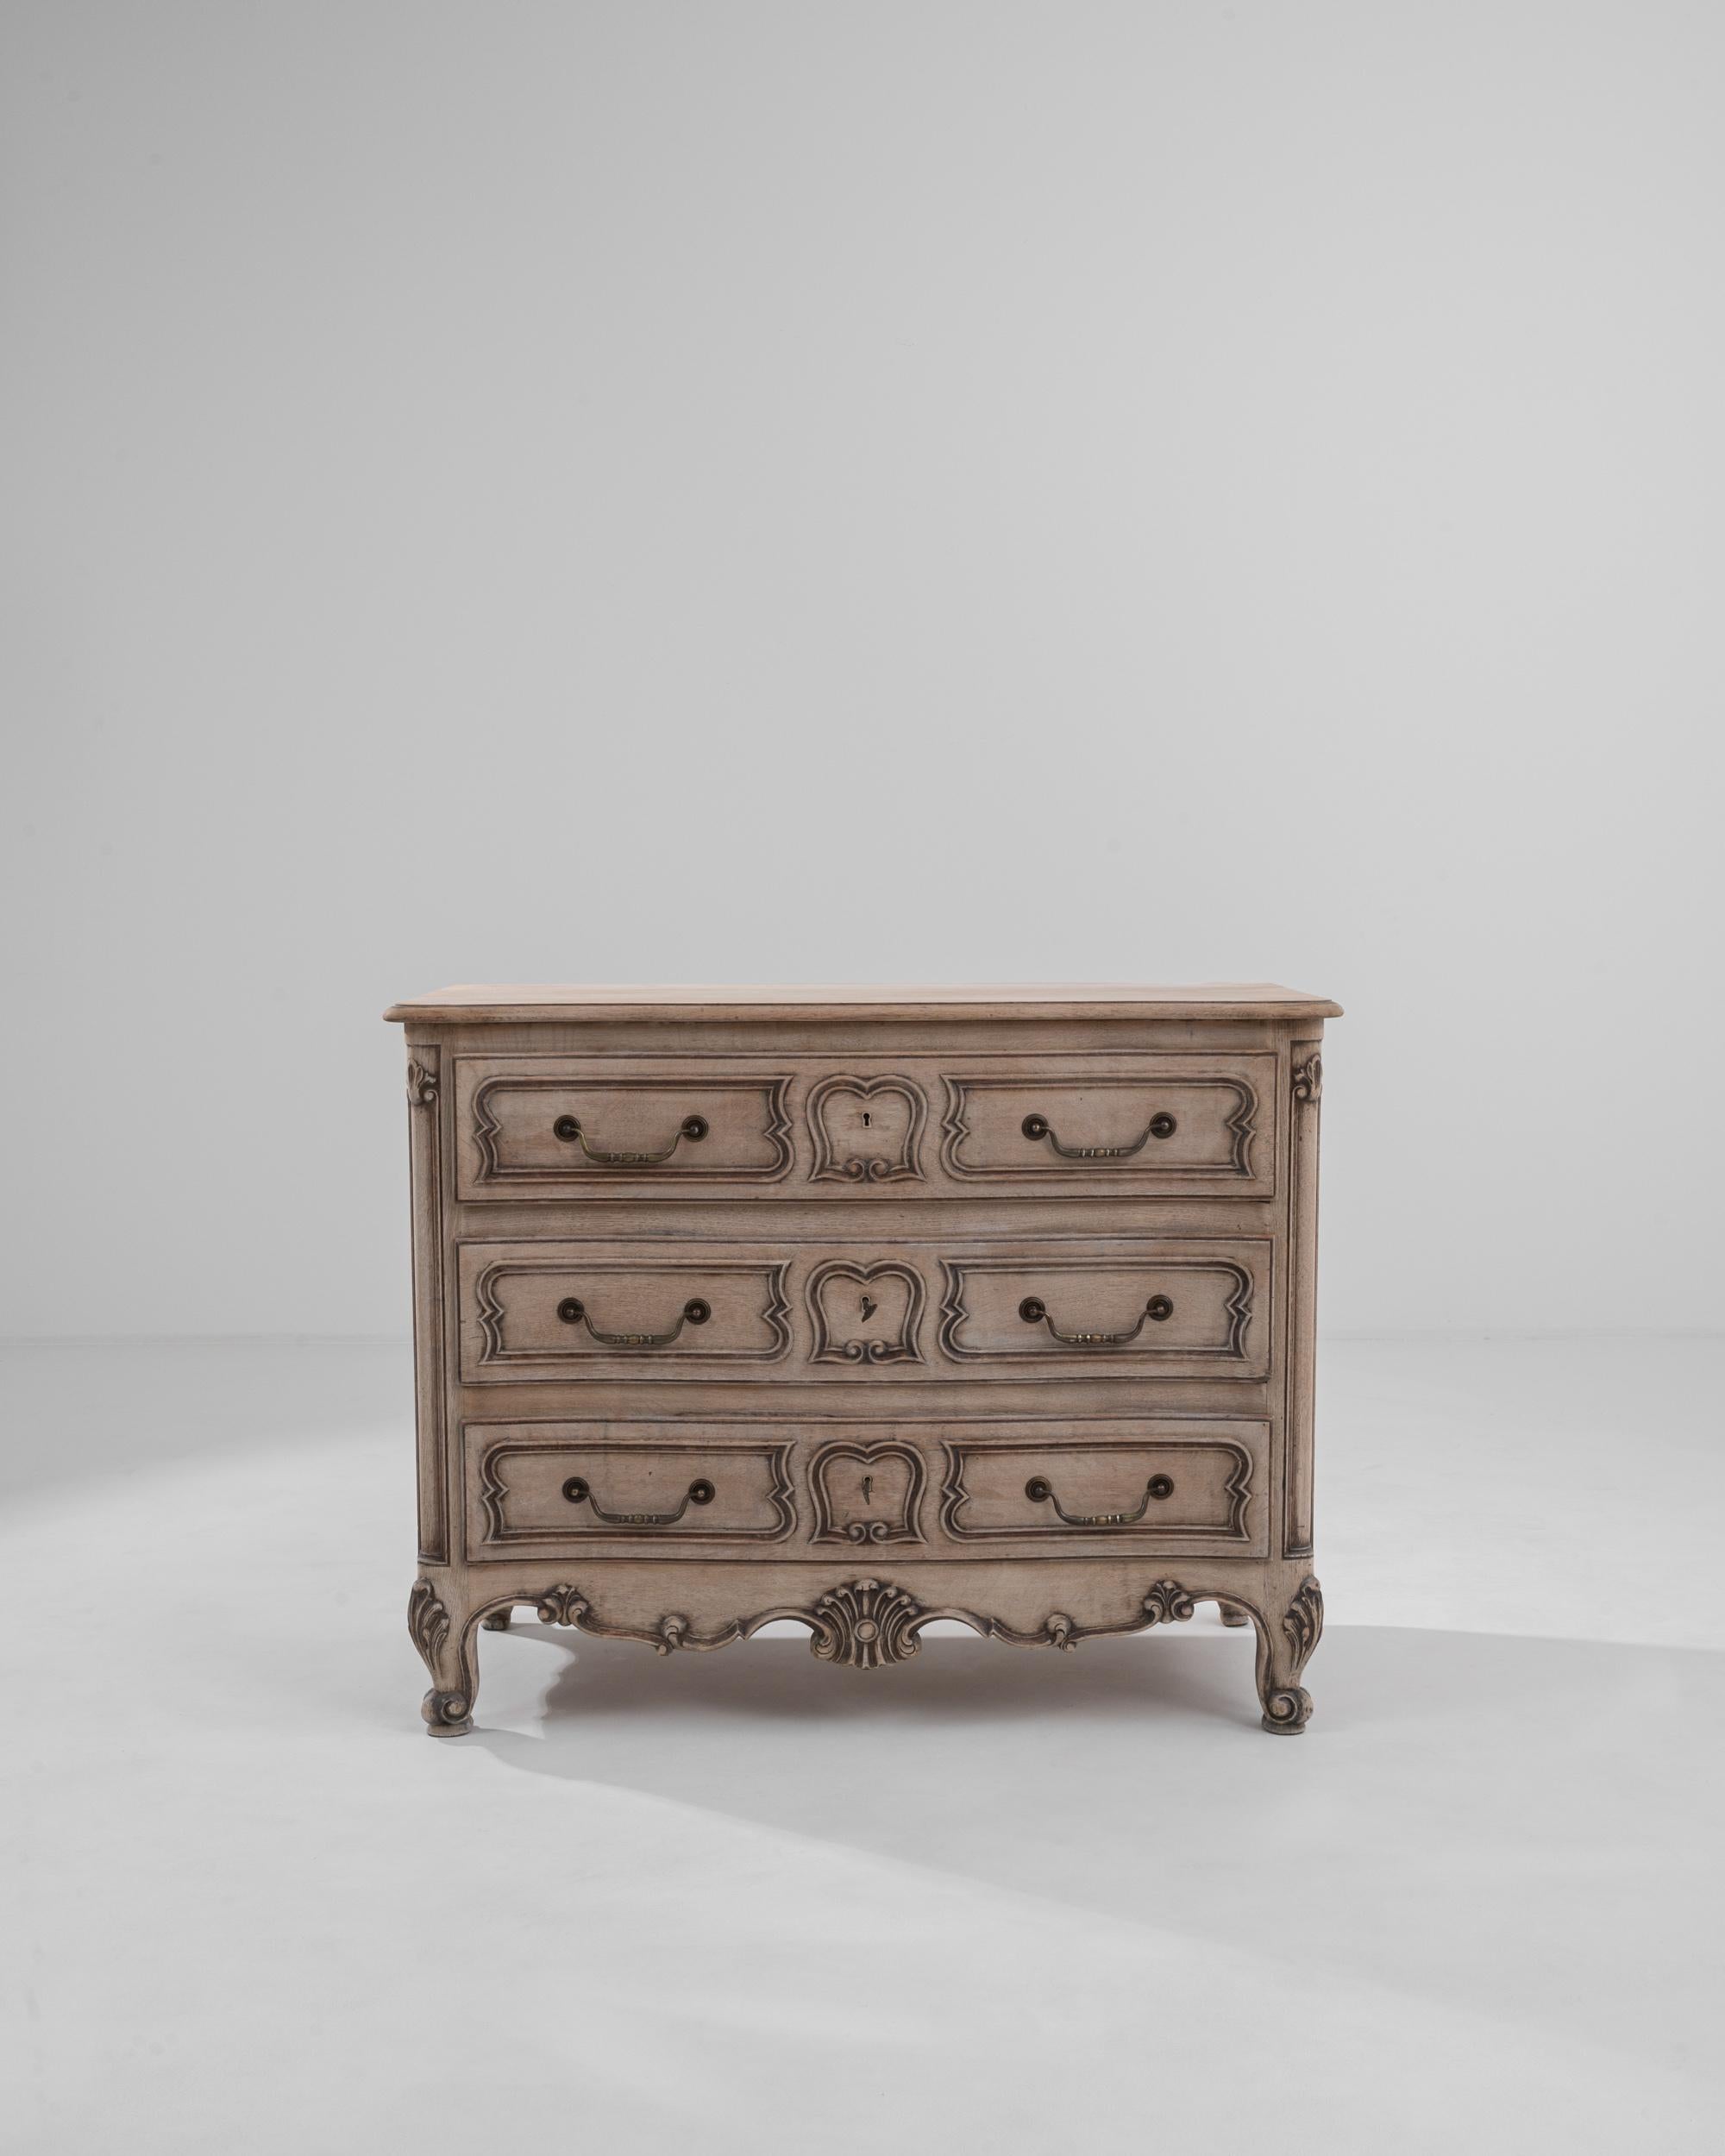 A chest of drawers made in Belgium, circa 1960. This bright and cheerful chest of drawers exudes both a robust regality and an approachable friendly aura. The swooping contours of its drawer handles interact playfully with the unique shaping of the